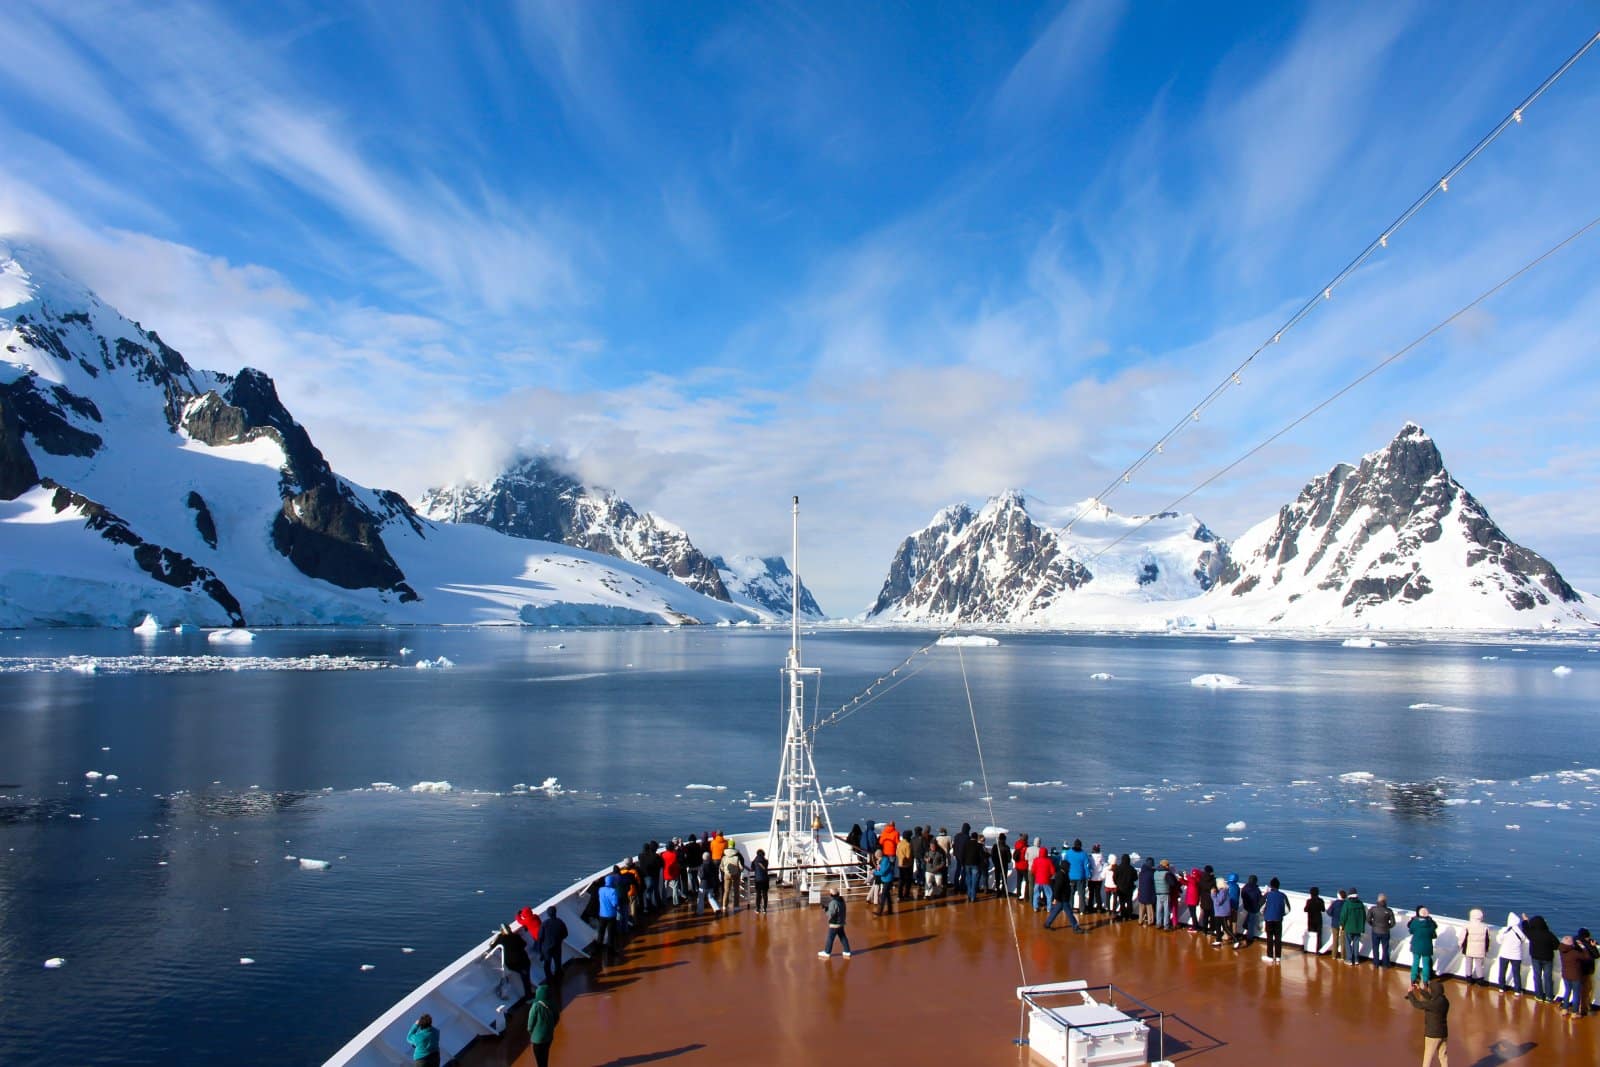 <p>An expedition cruise to Antarctica offers a once-in-a-lifetime adventure with icebergs, penguins, and untouched wilderness.</p>